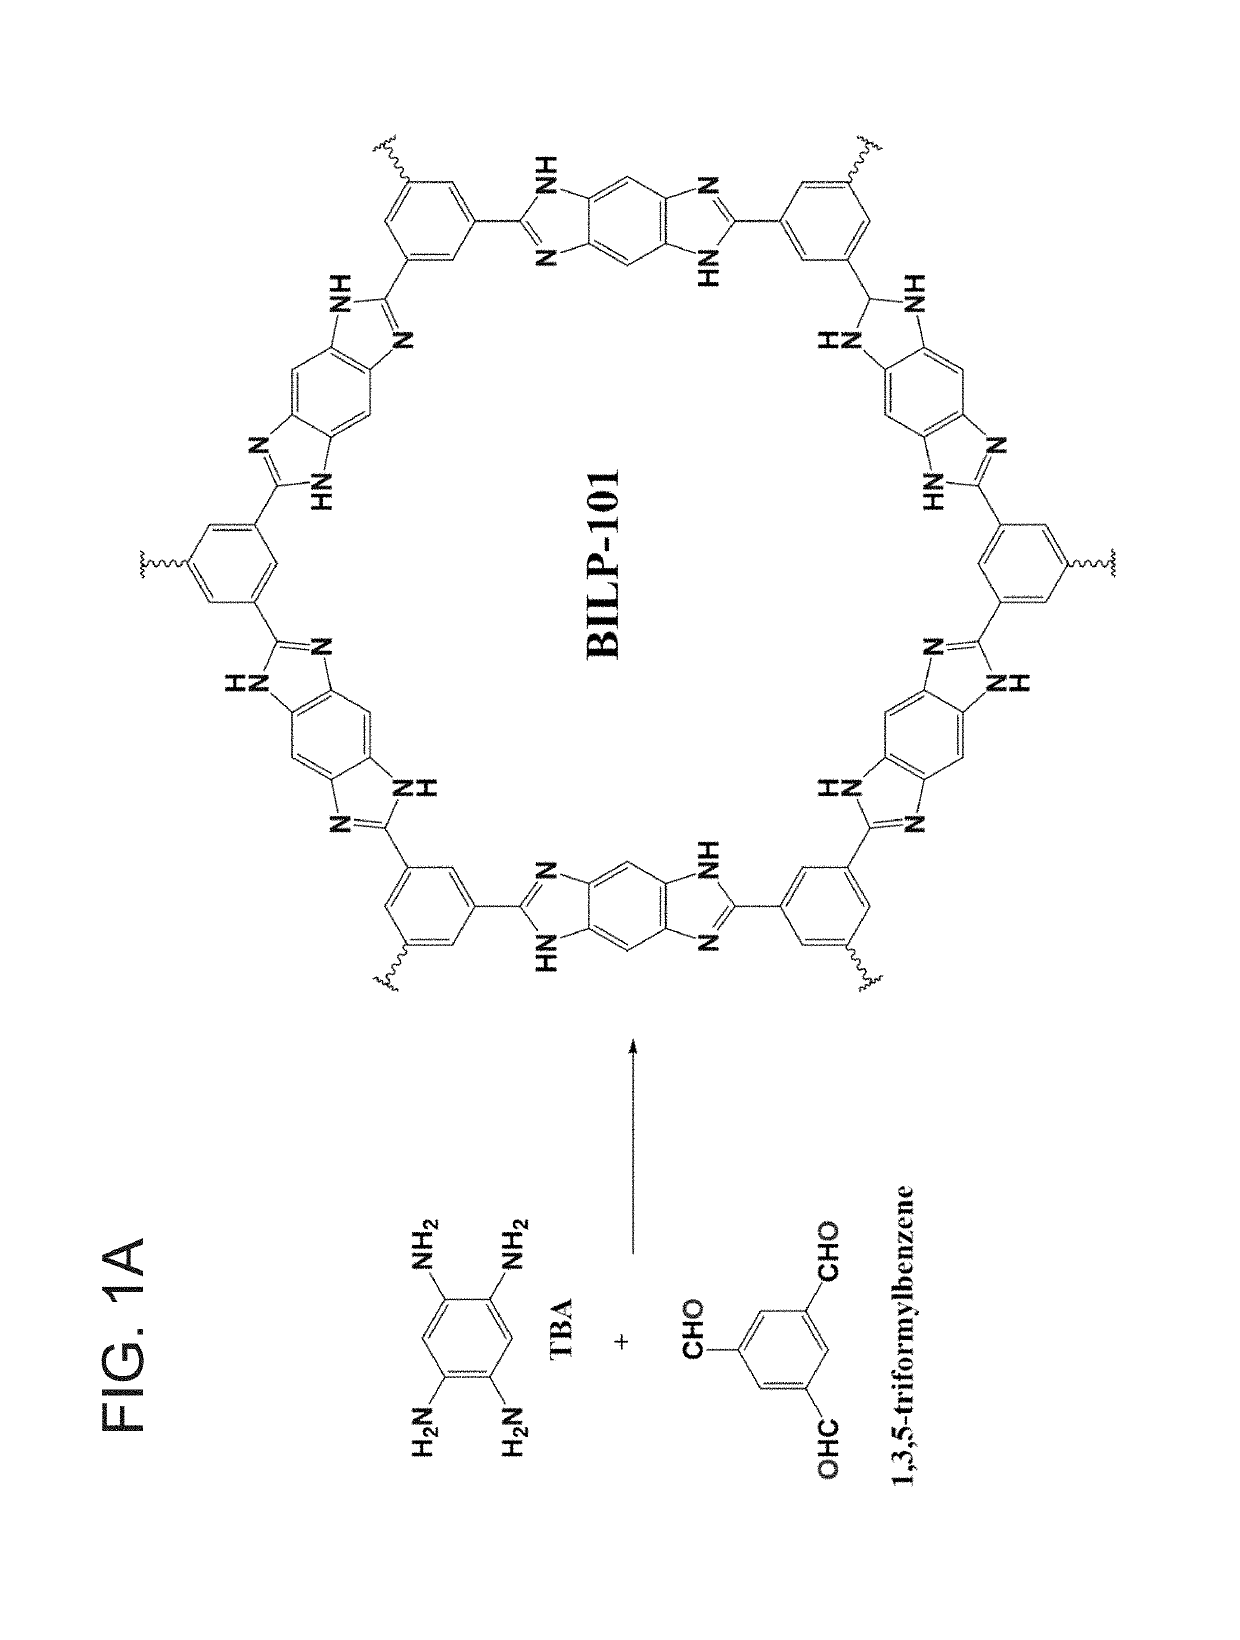 Polymer for carbon dioxide capture and separation